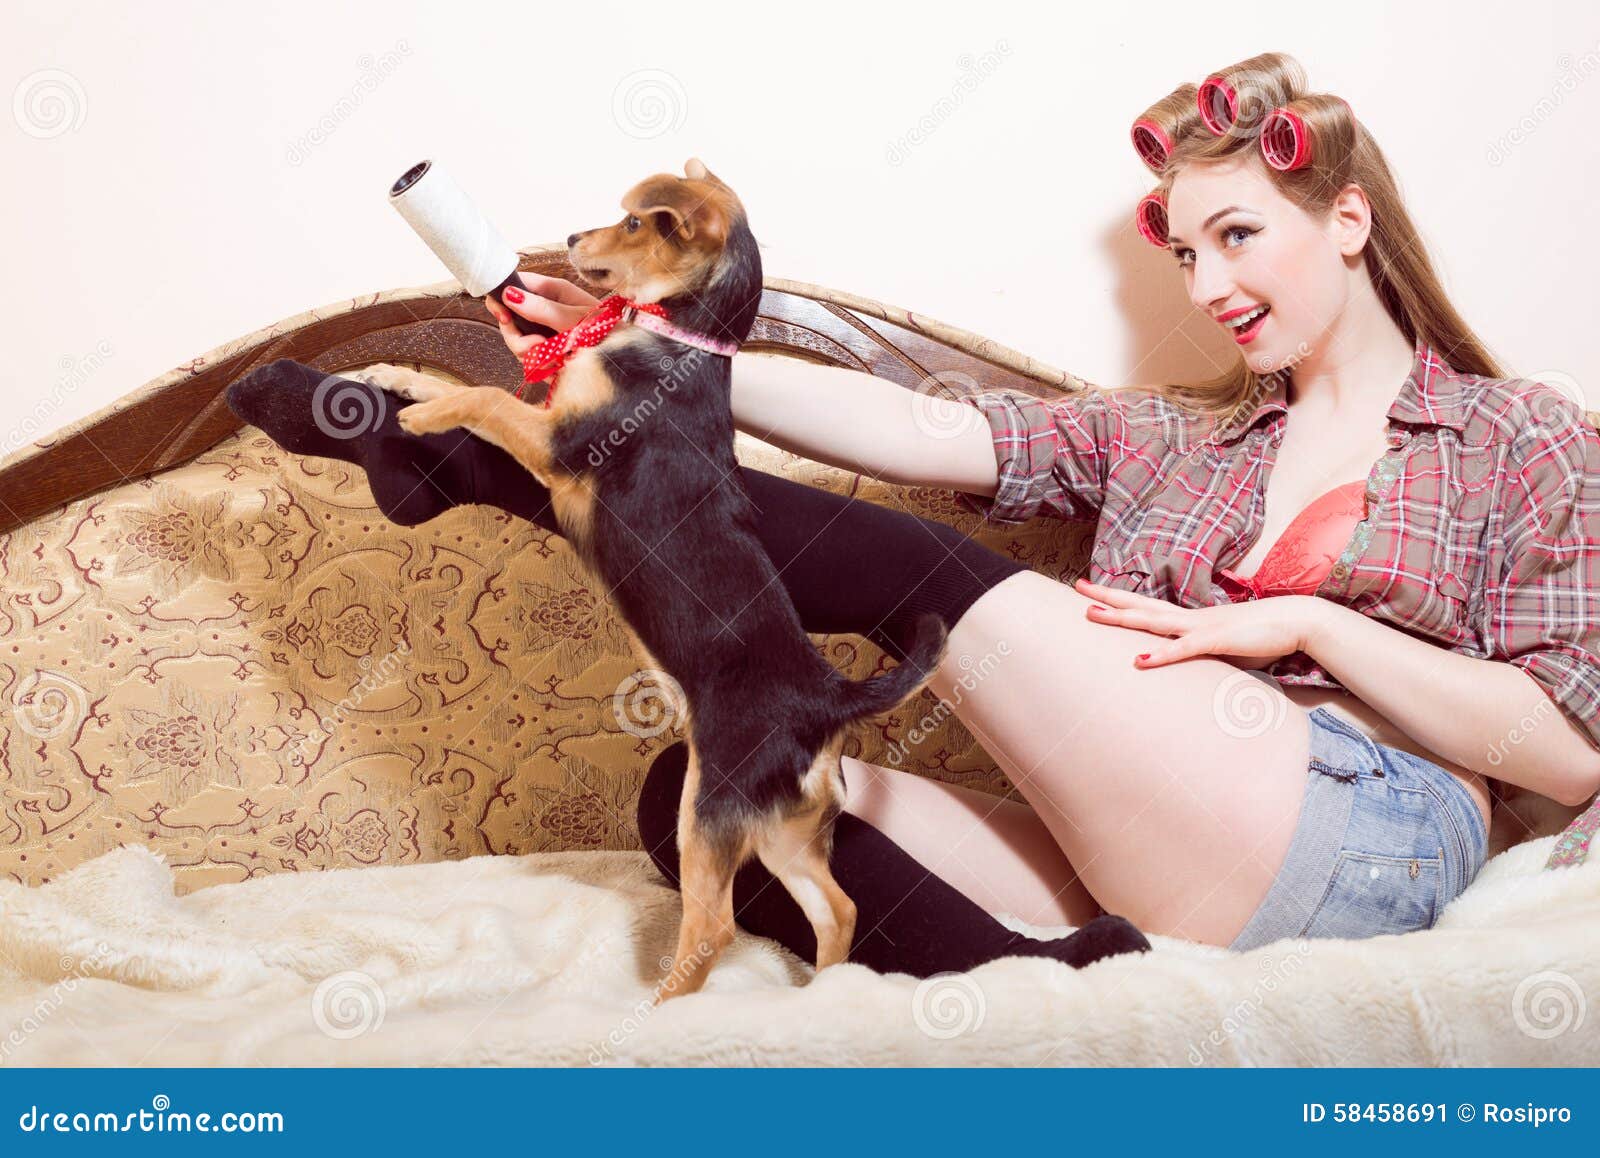 Sexi Young Smiling Girl Playing with a Dog Stock Image - Image of domestic,  little: 58458691